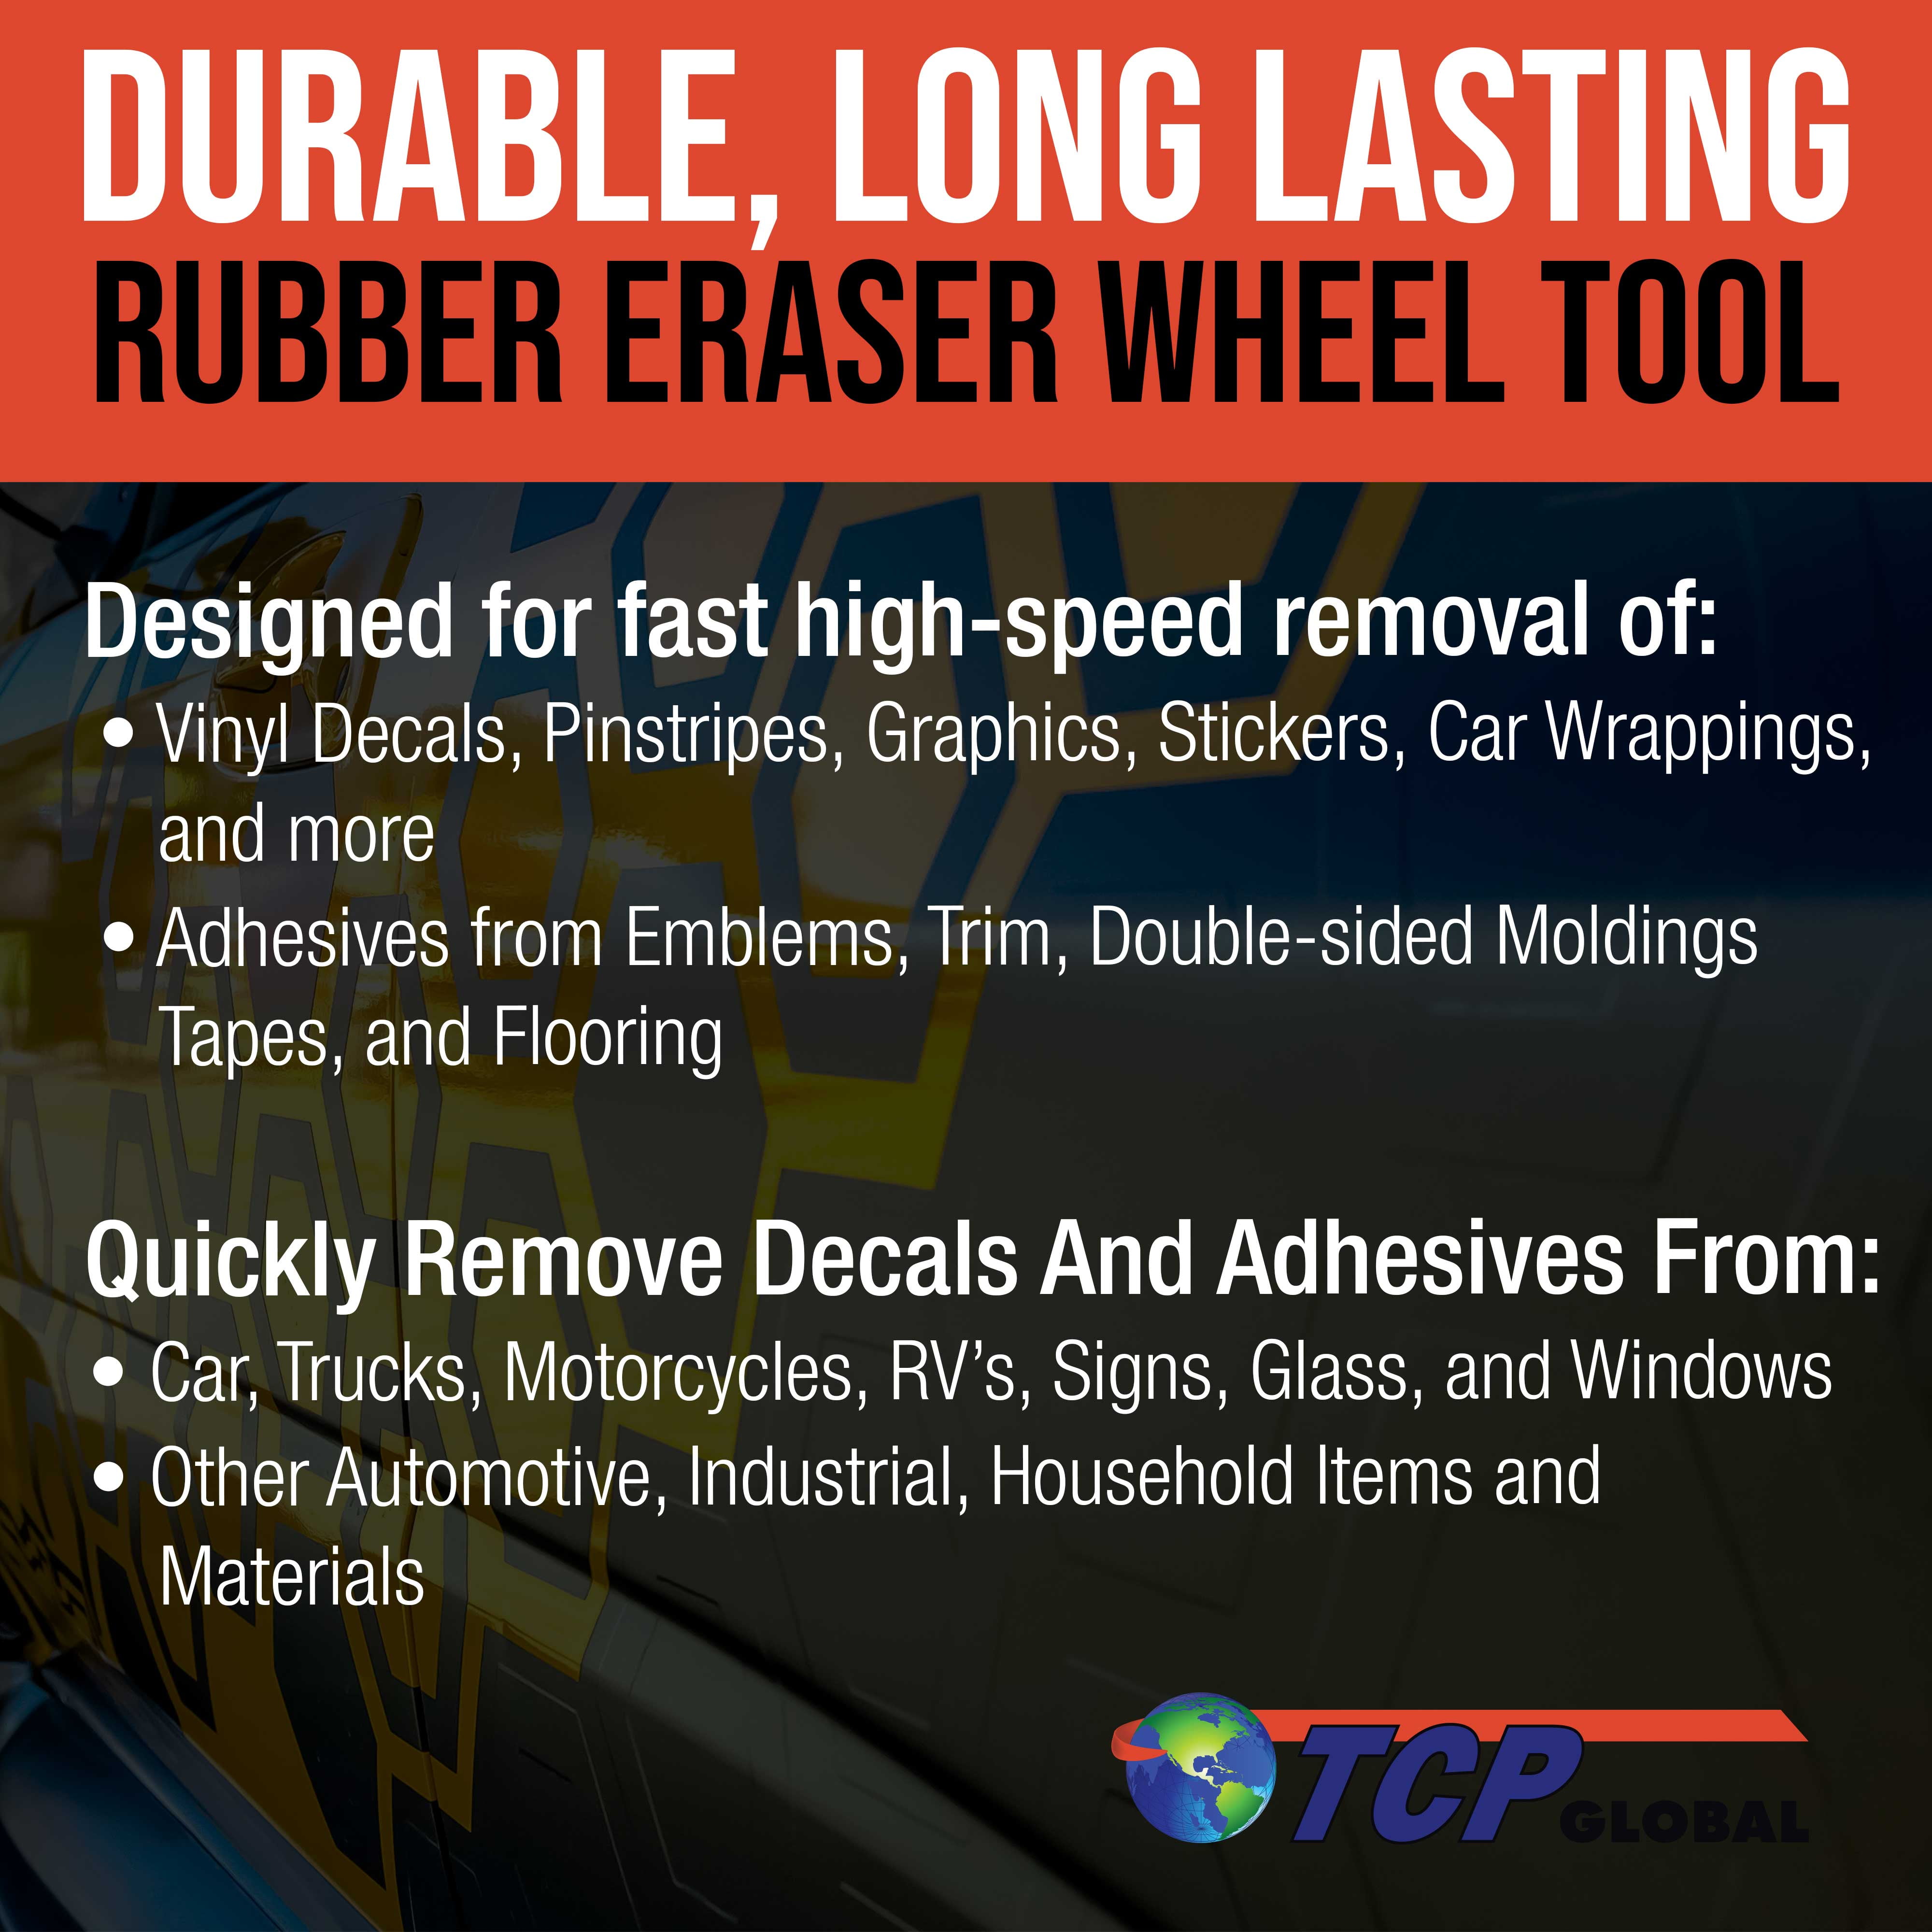 TCP Global Rubber Eraser Wheel, 3.5” Knobby Slotted Edge Pad with Drill Adapter - Adhesive Remover Tool, Removes Decals, Pinstripes, Stripes, Vinyl